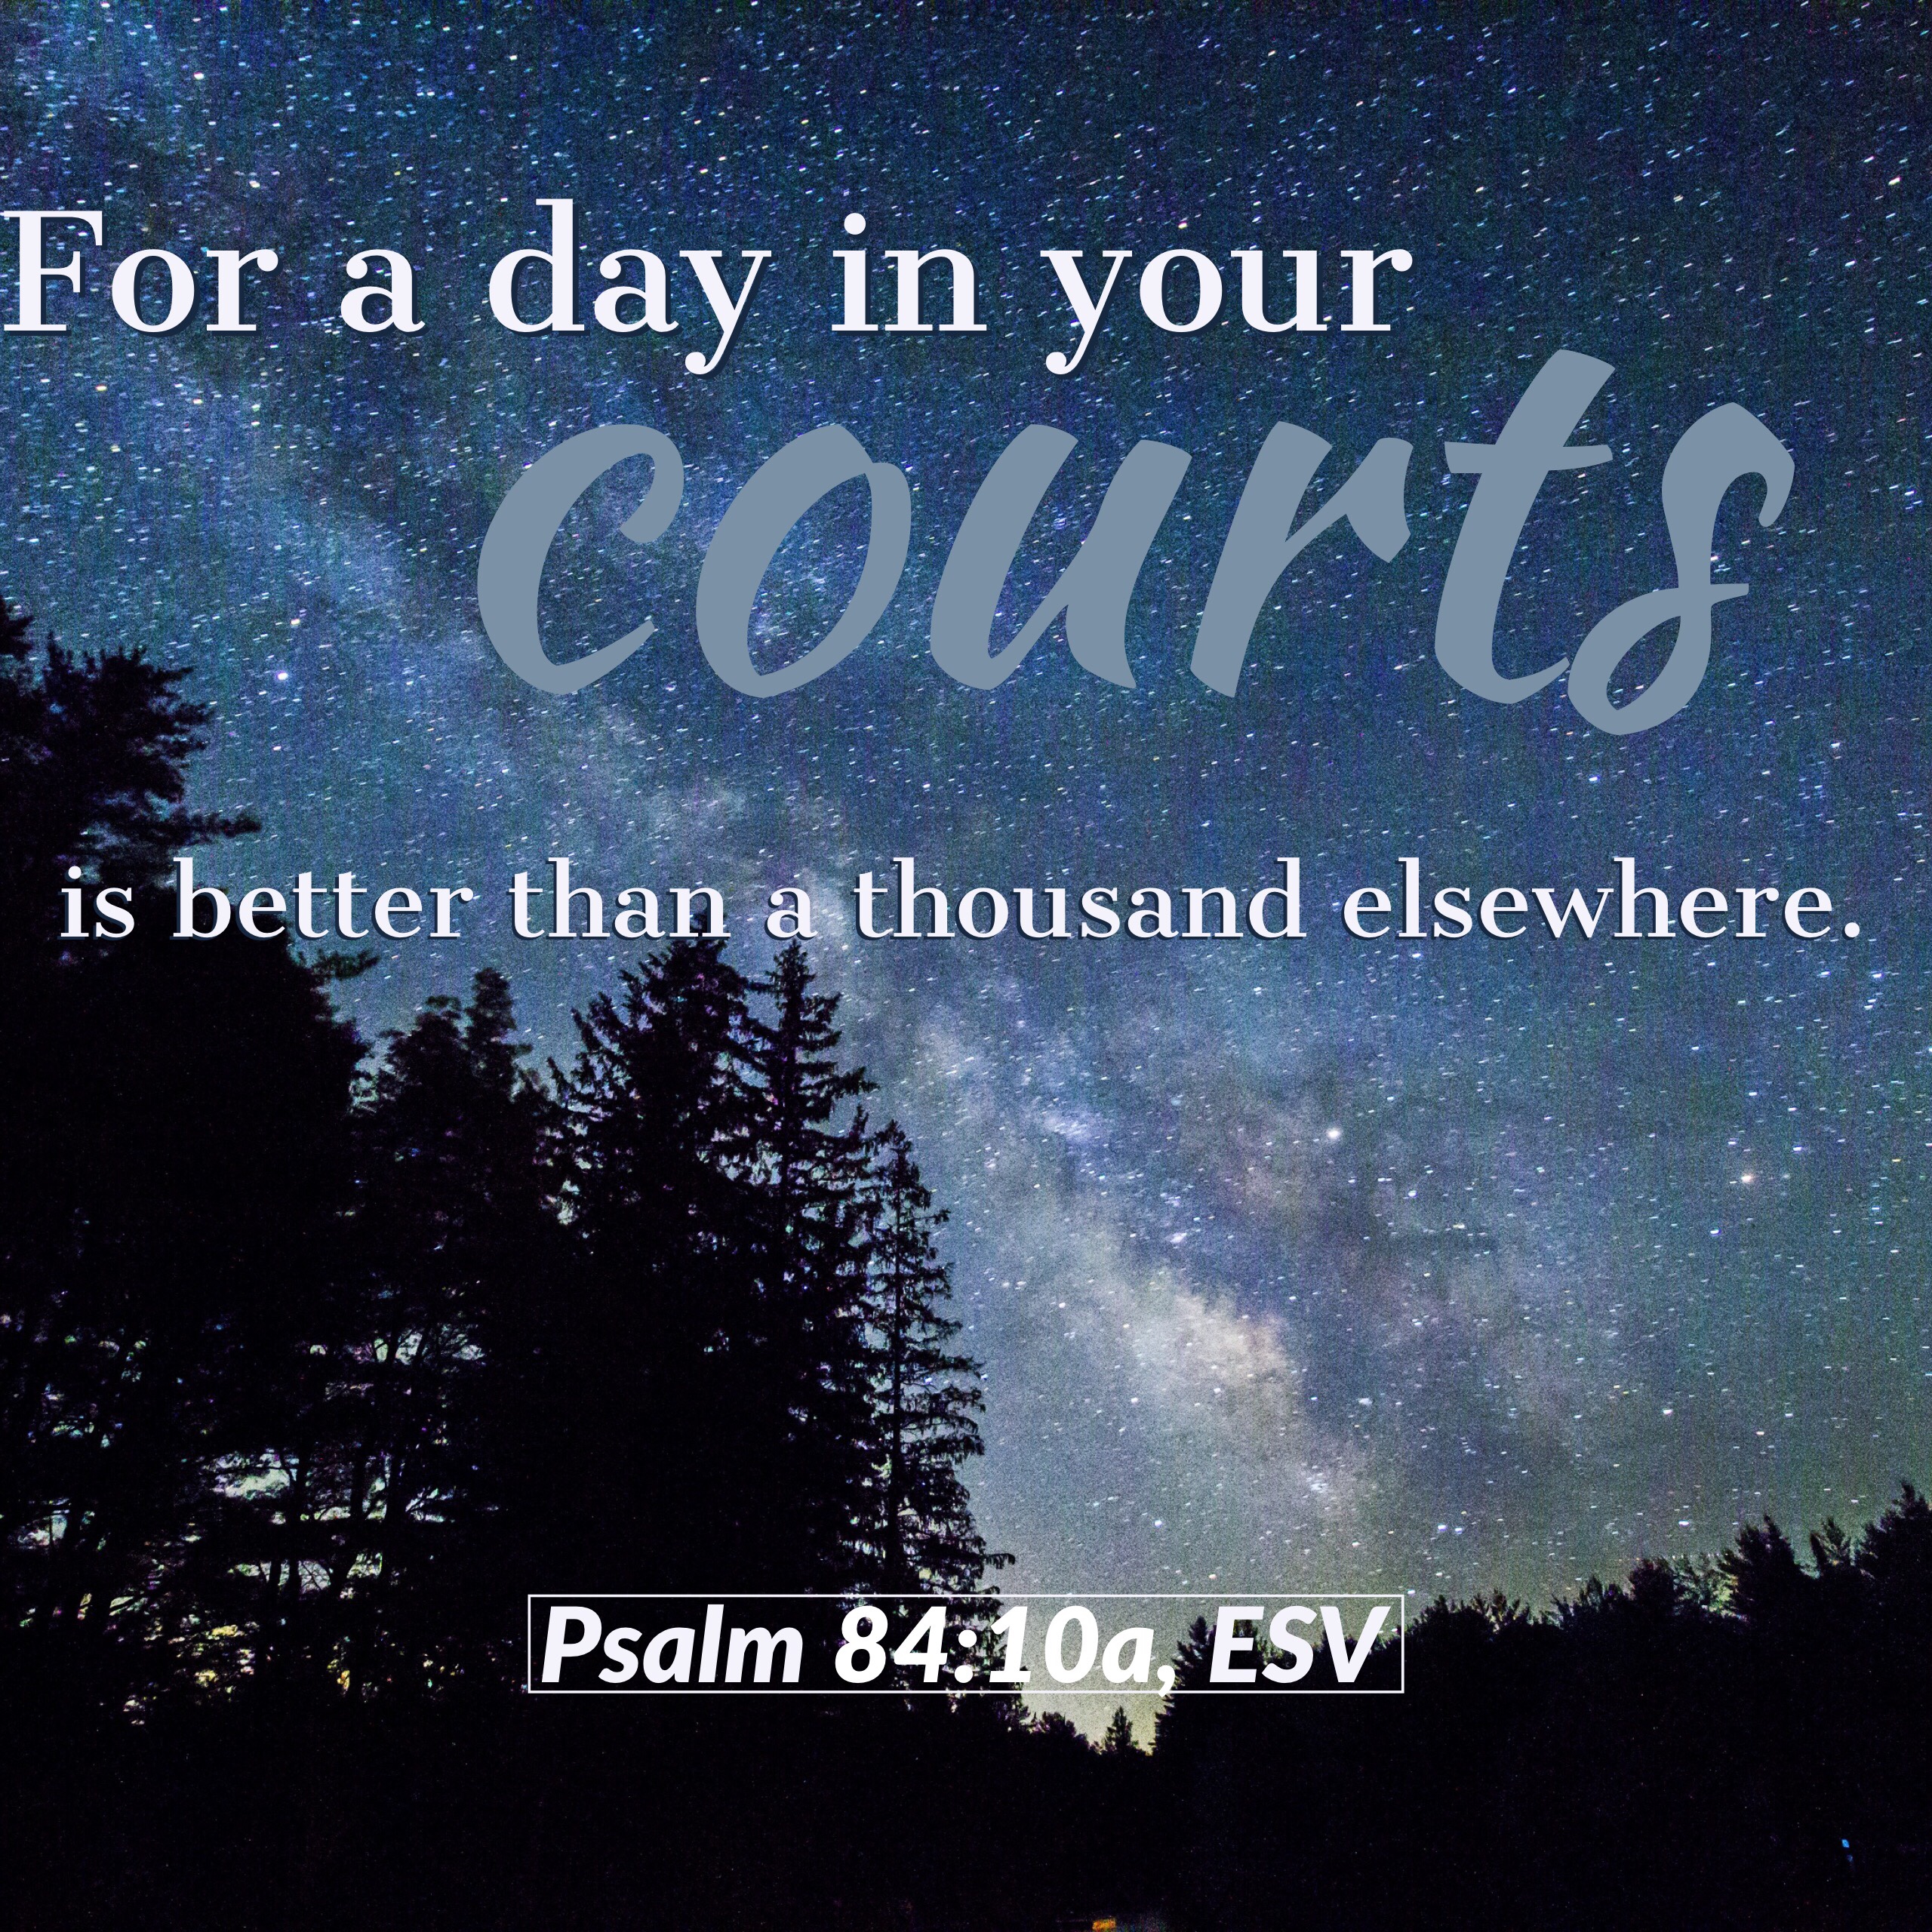 “For a day in your courts is better than a thousand elsewhere. I would rather be a doorkeeper in the house of my God than dwell in the tents of wickedness,” (Psalm‬ ‭84:10,‬ ‭ESV‬‬).